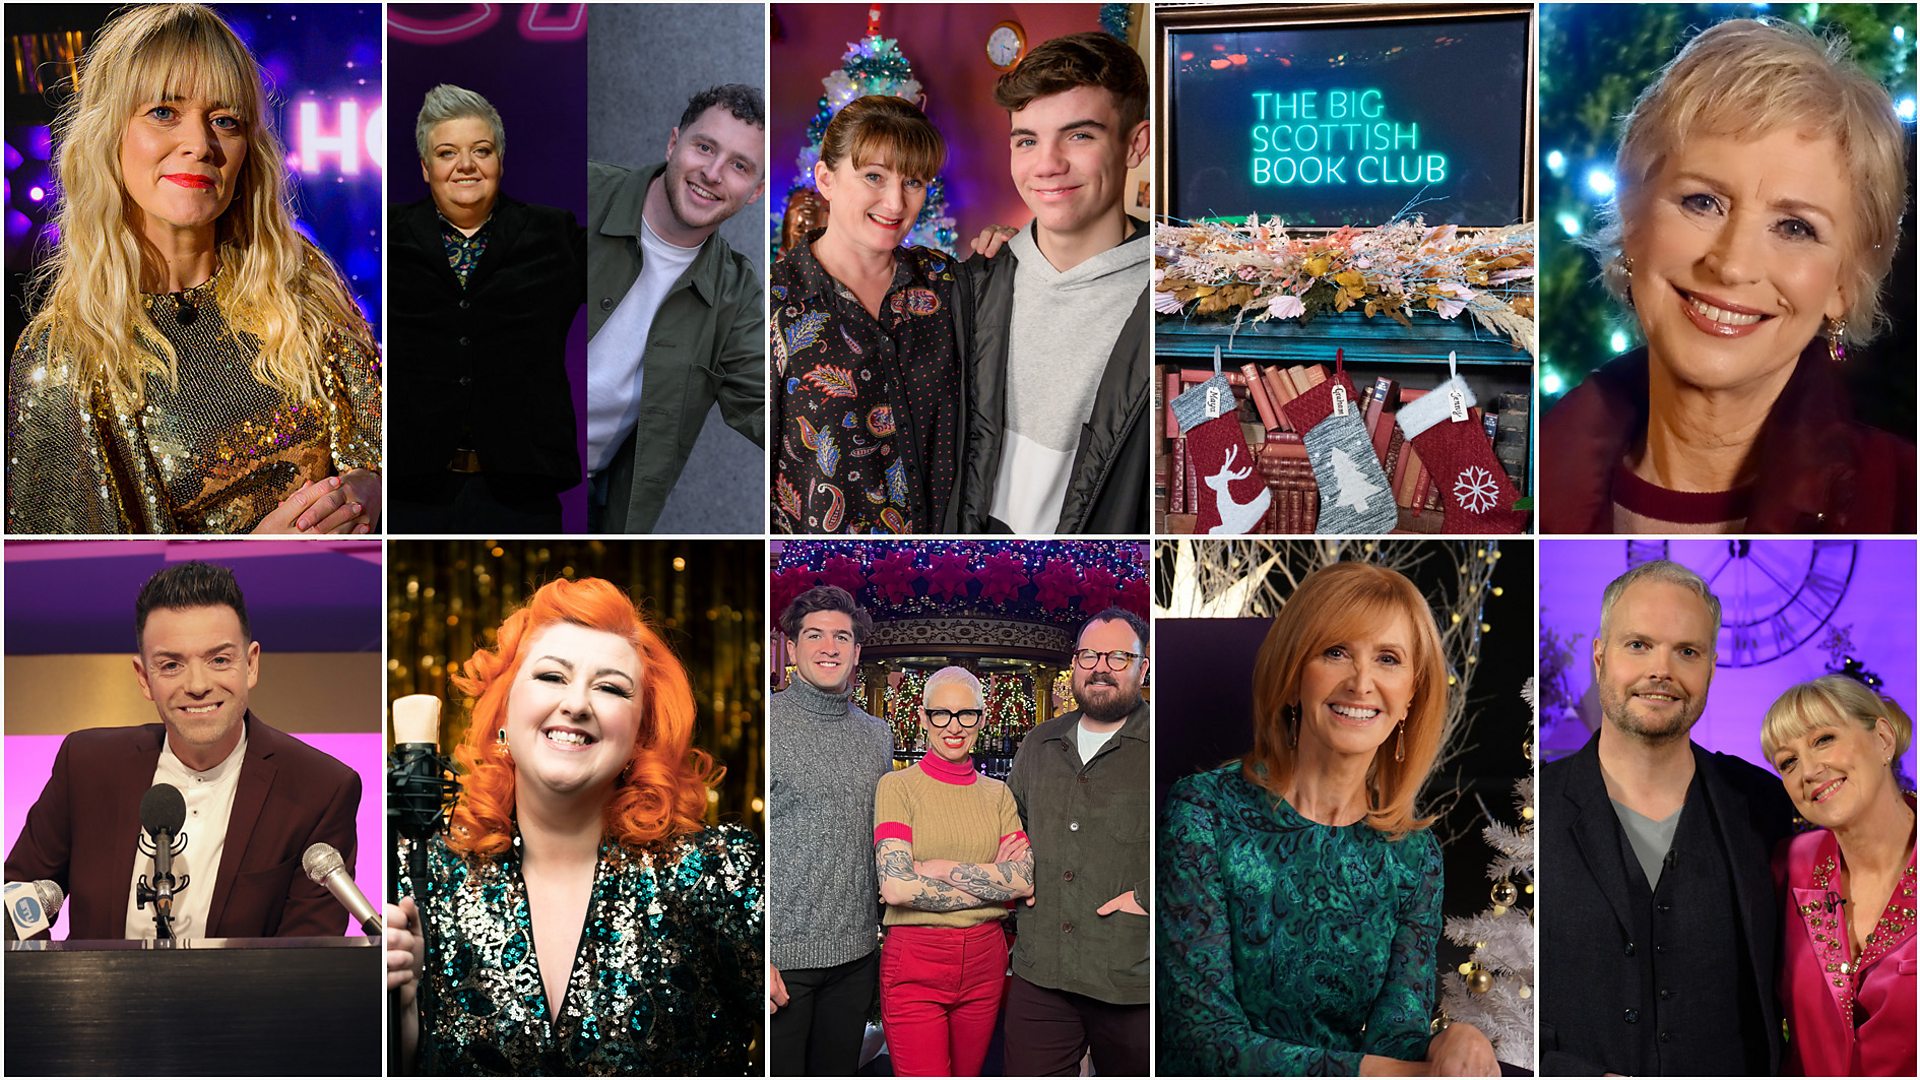 BBC Scotland unwraps festive schedule packed with Comedy, Music and Entertainment